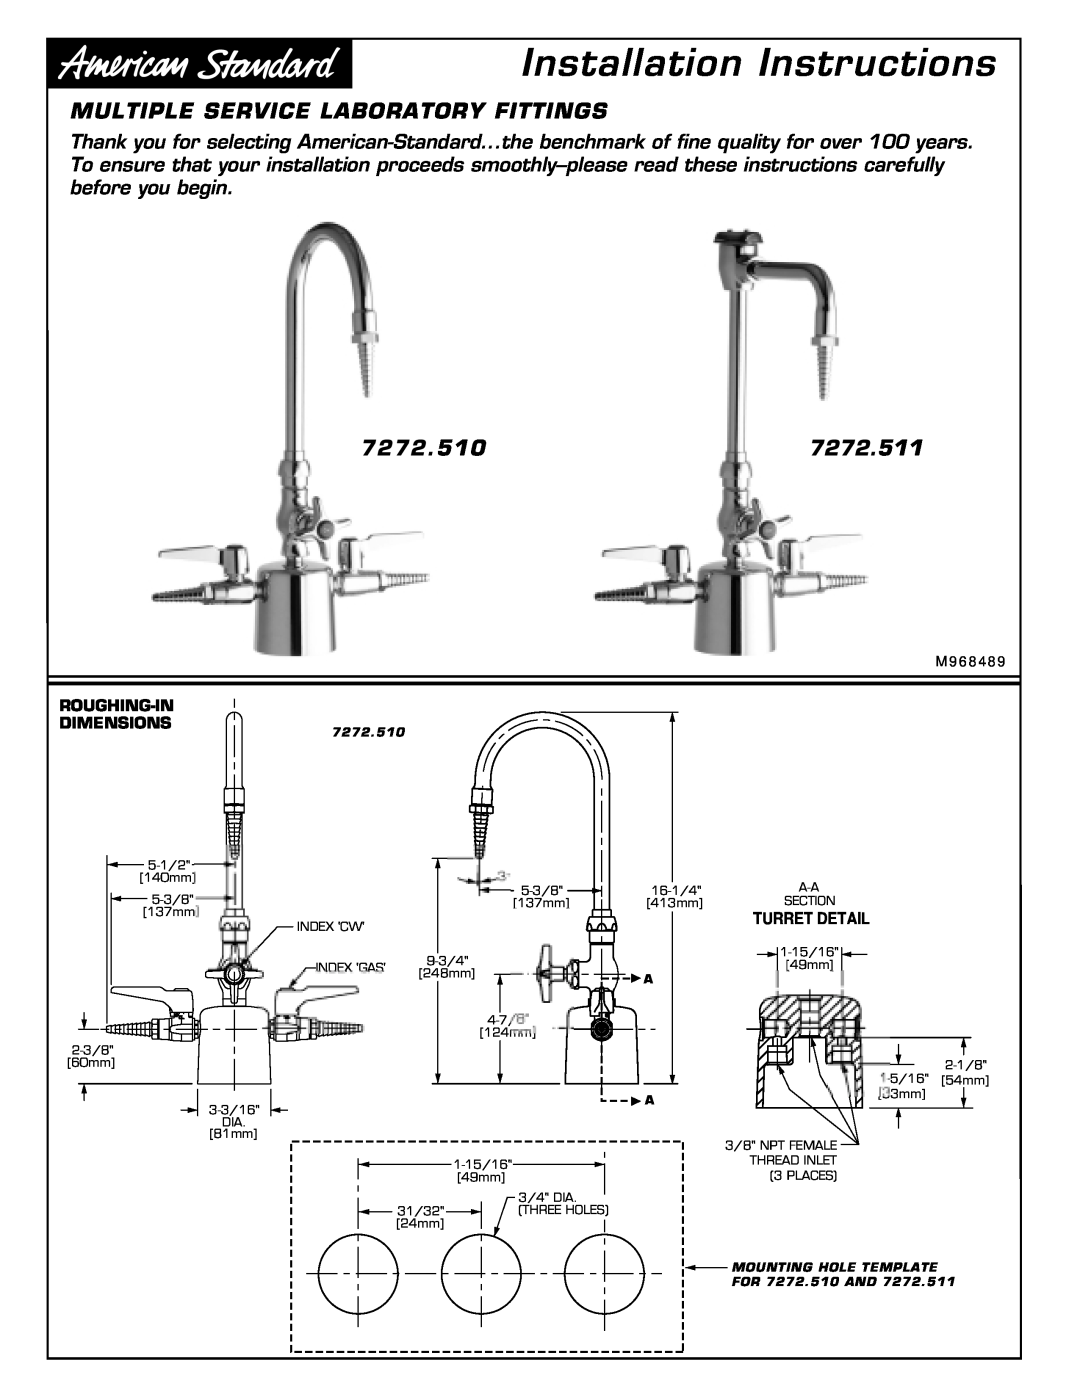 American Standard 7272.510 installation instructions Installation Instructions, Multiple Service Laboratory Fittings 